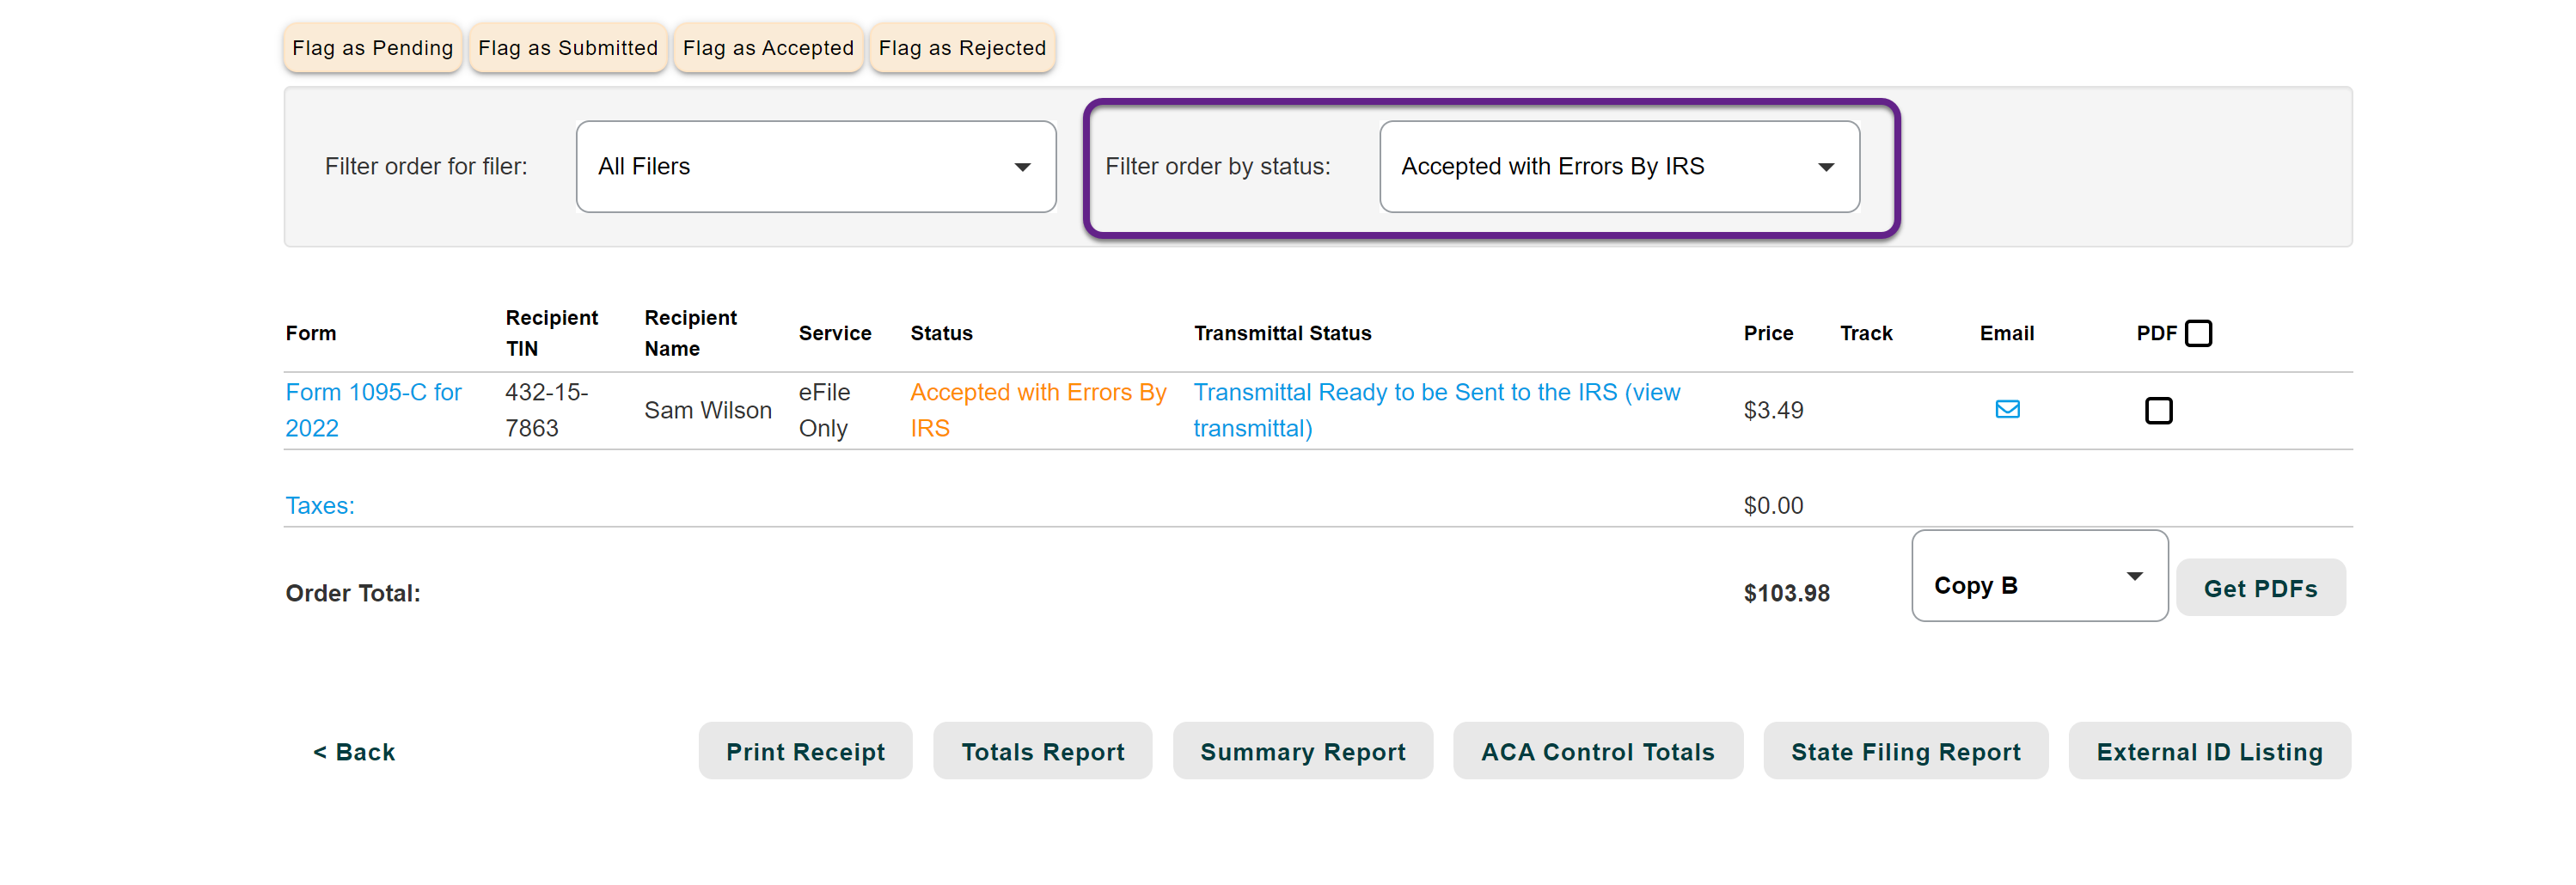 Image of the Order Details page with a callout on the Filer order by status tab.